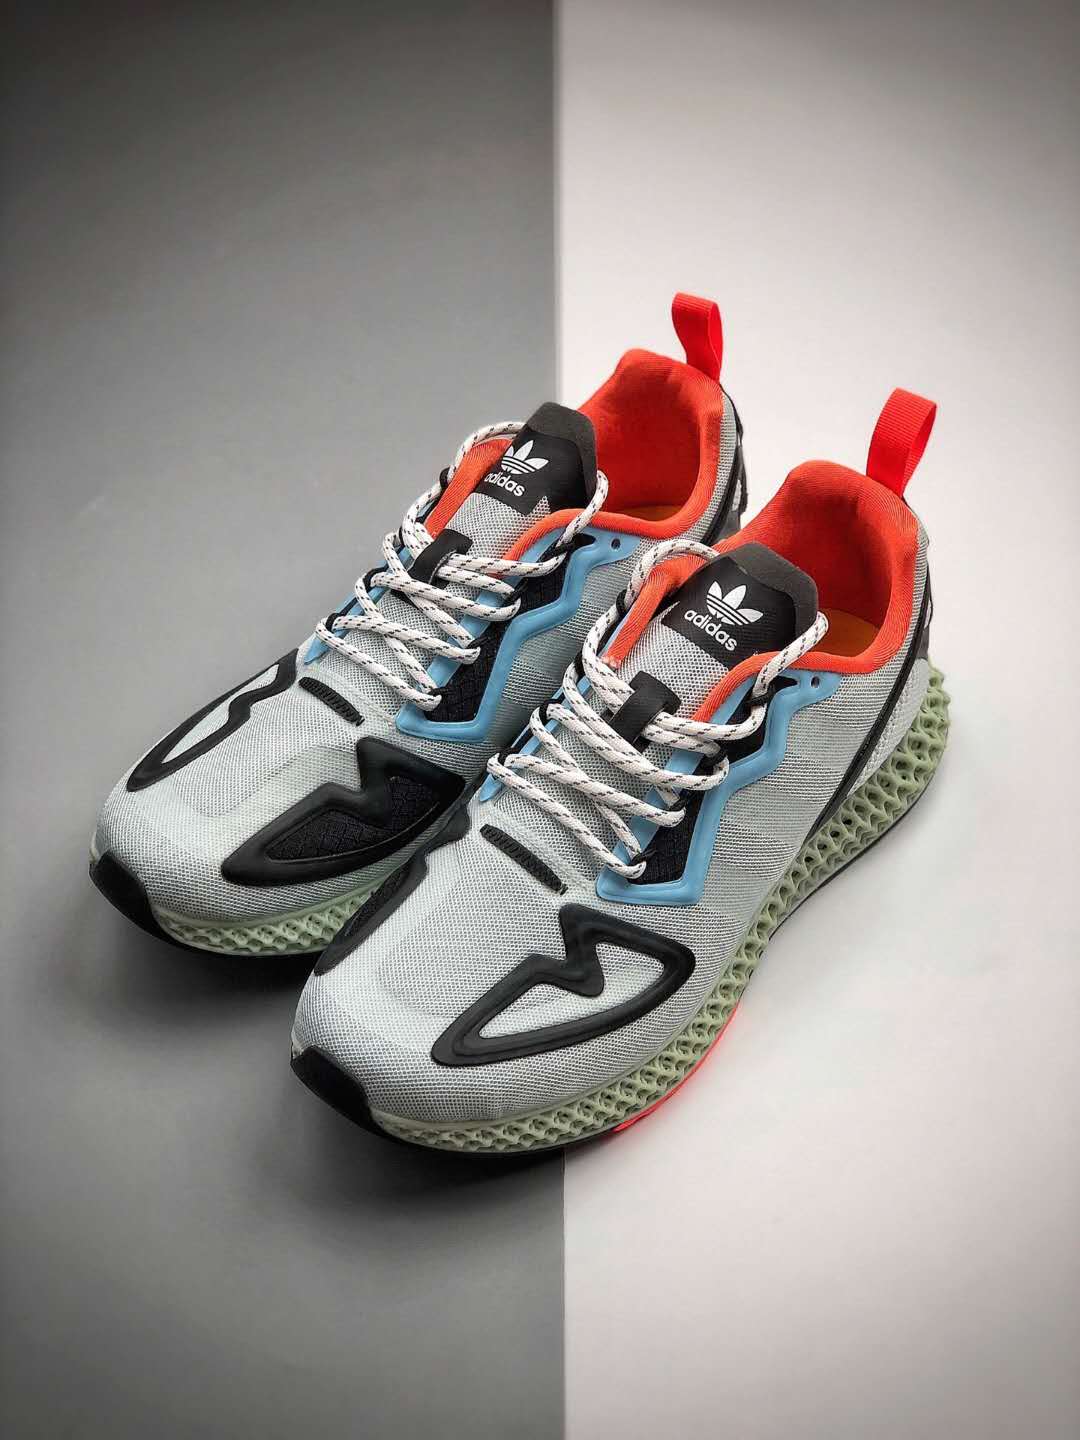 Adidas ZX 2K 4D Dash Green FV8500 - Innovative Design and Comfort | Fast Shipping